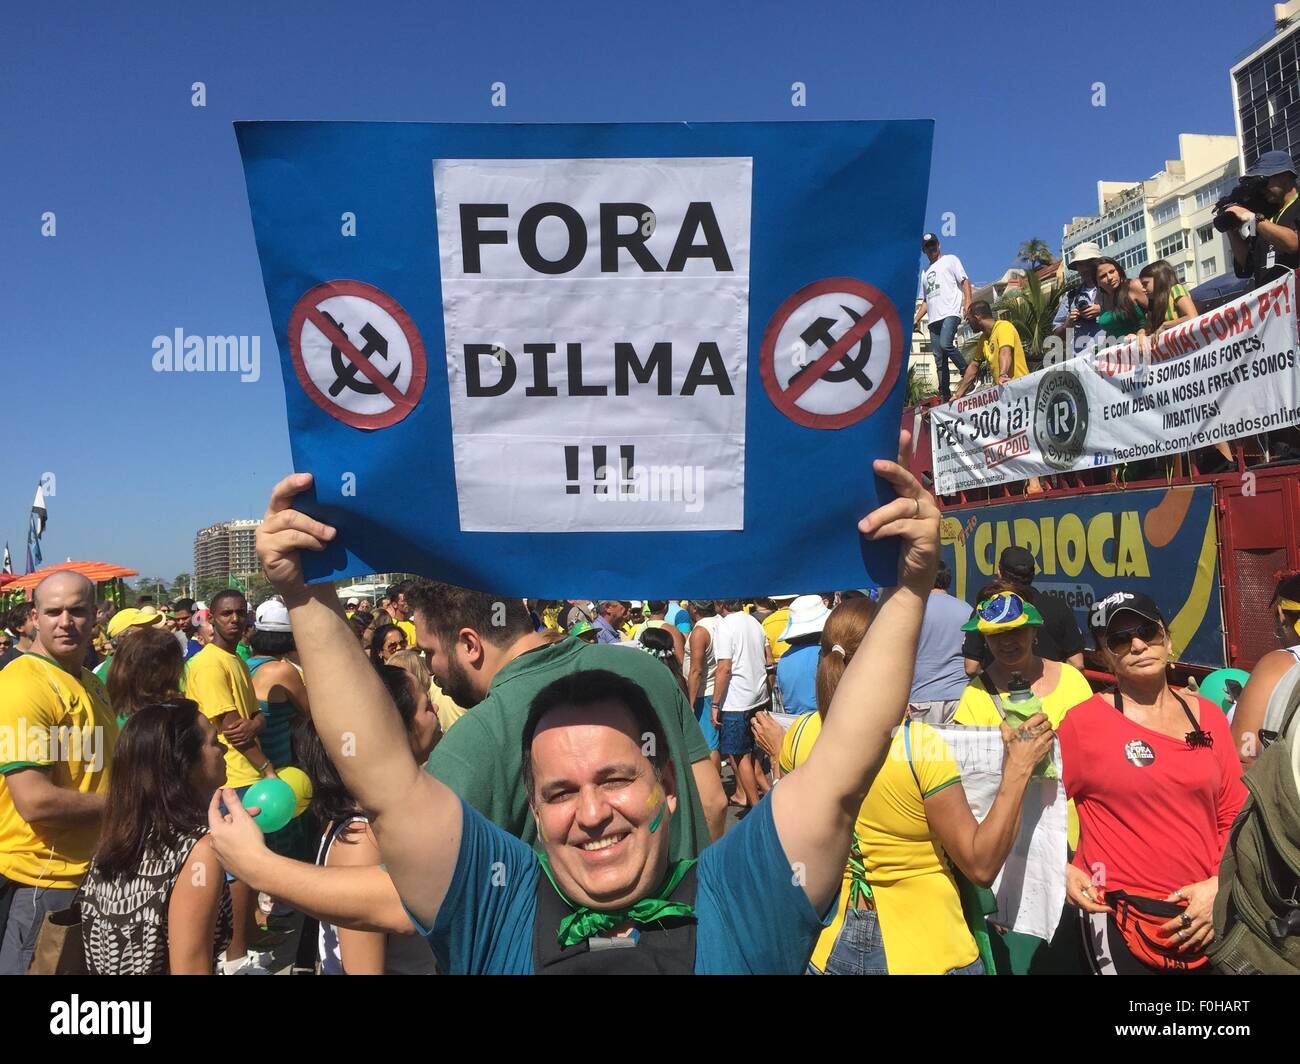 A protestor against president Rousseff holds a placard that reads 'Fora Dilma' (Dilma out) at a demonstration in Rio de Janeiro, Brazil, 16 August 2015. Many Brazilians are calling for Rousseff's resignation due to an extensive corruption scandal. PHOTO: GEORG ISMAR Stock Photo